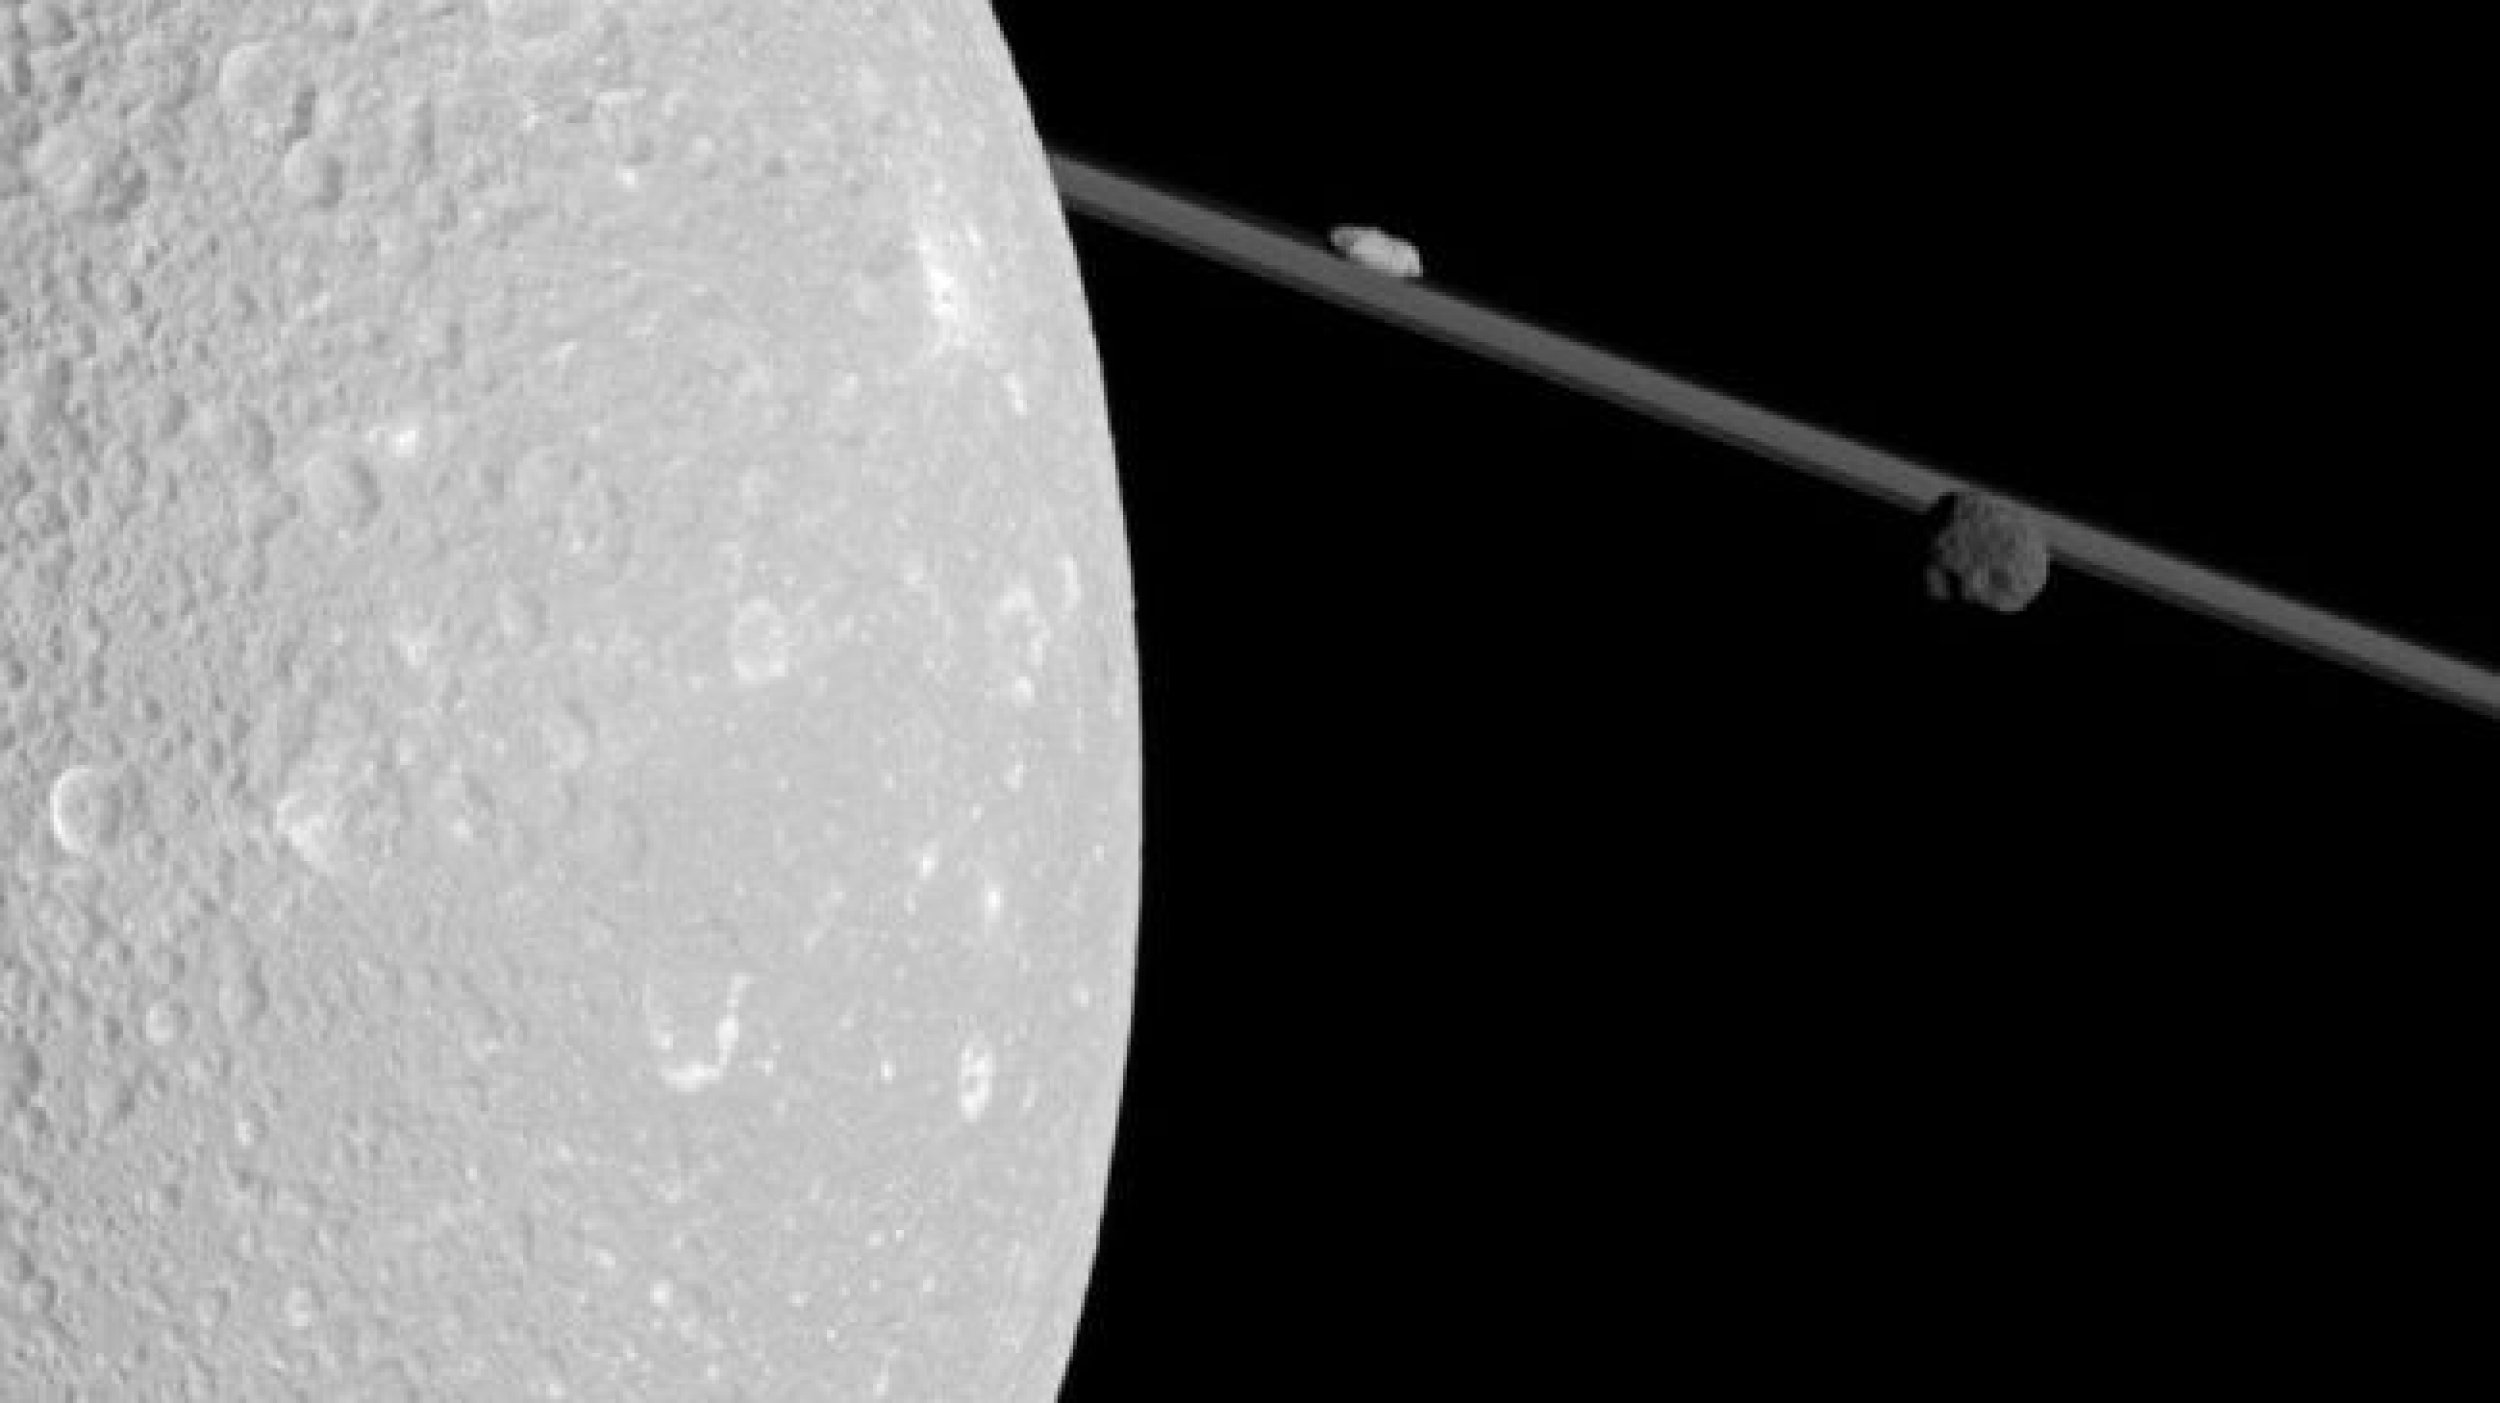 NASA Spacecraft Captures Video Imagery From the Dark Side of the Moon